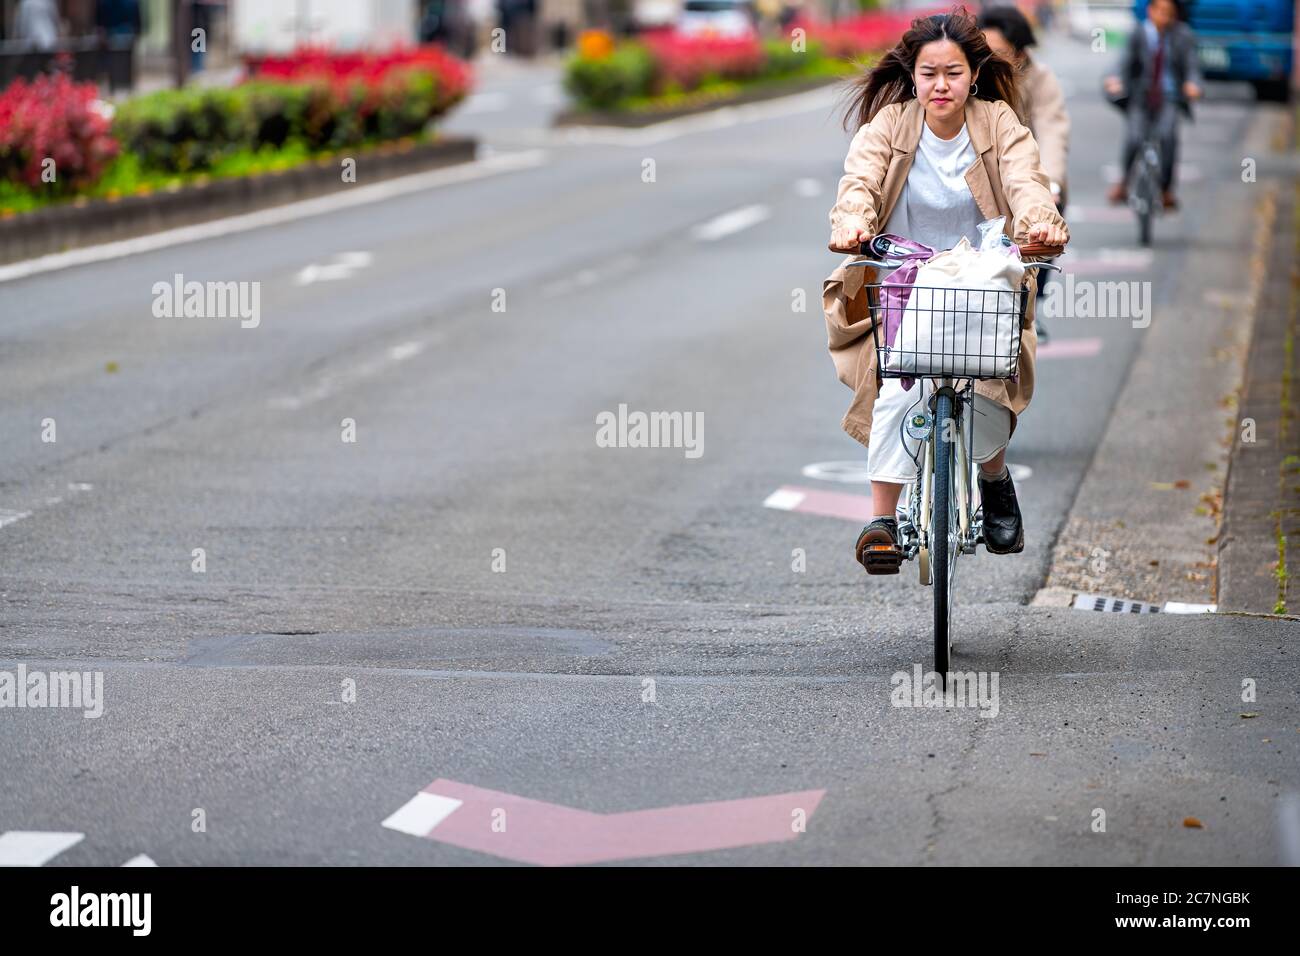 Kyoto, Japan - April 17, 2019: Japanese person woman on bicycle riding bike on street candid city life in traffic road lane Stock Photo